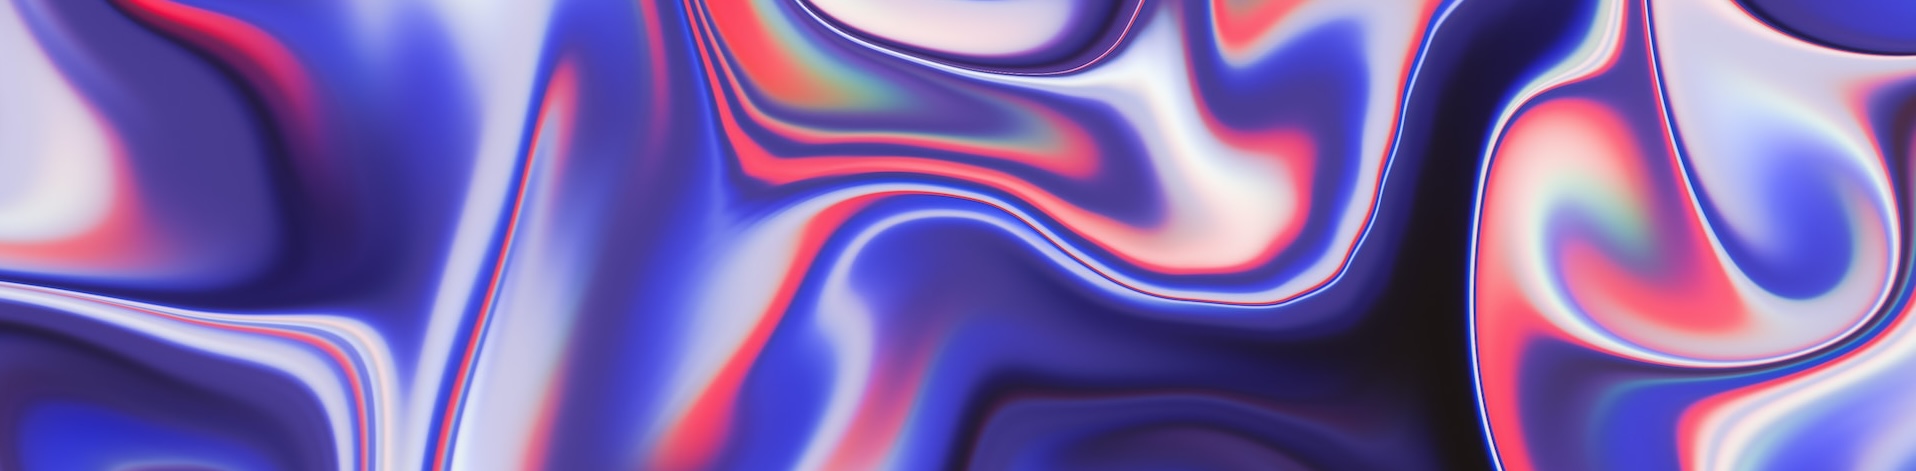 abstract textured fluid colors